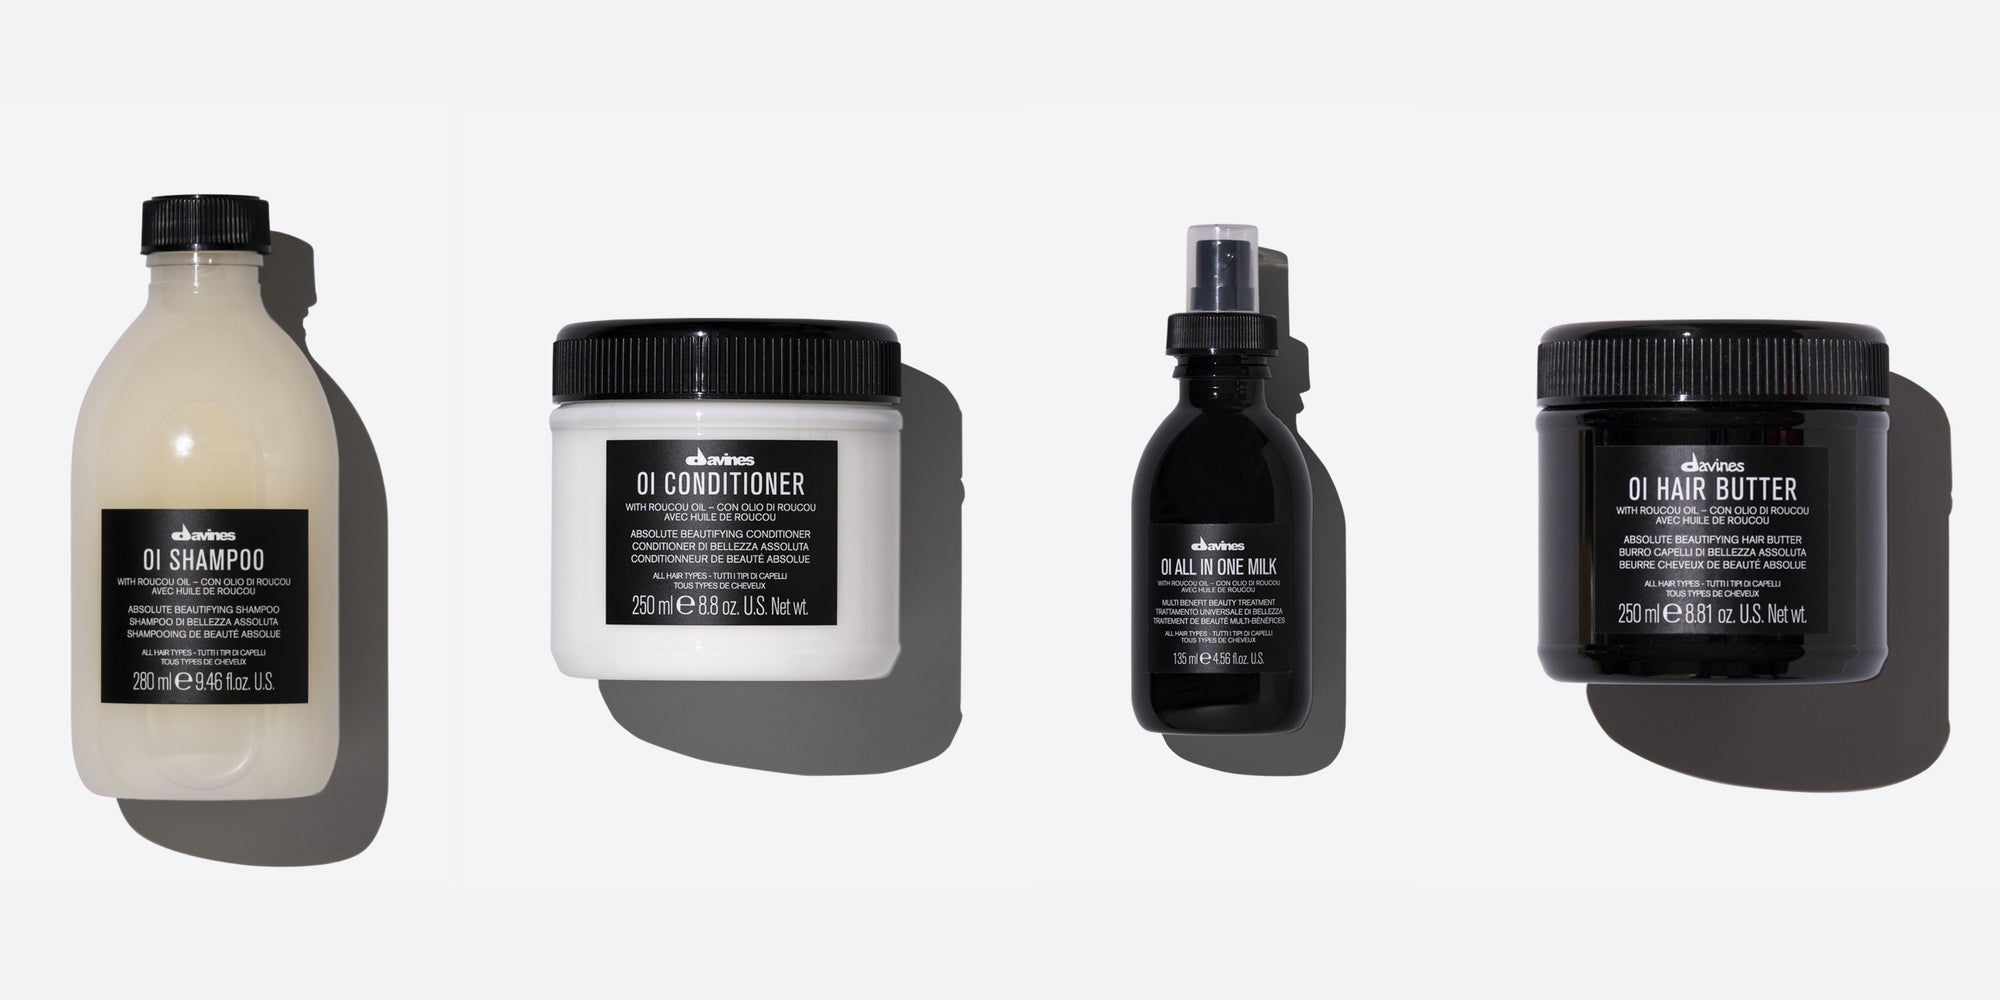 Oi Styling Set for Thin Hair 1  4 pz.Davines
